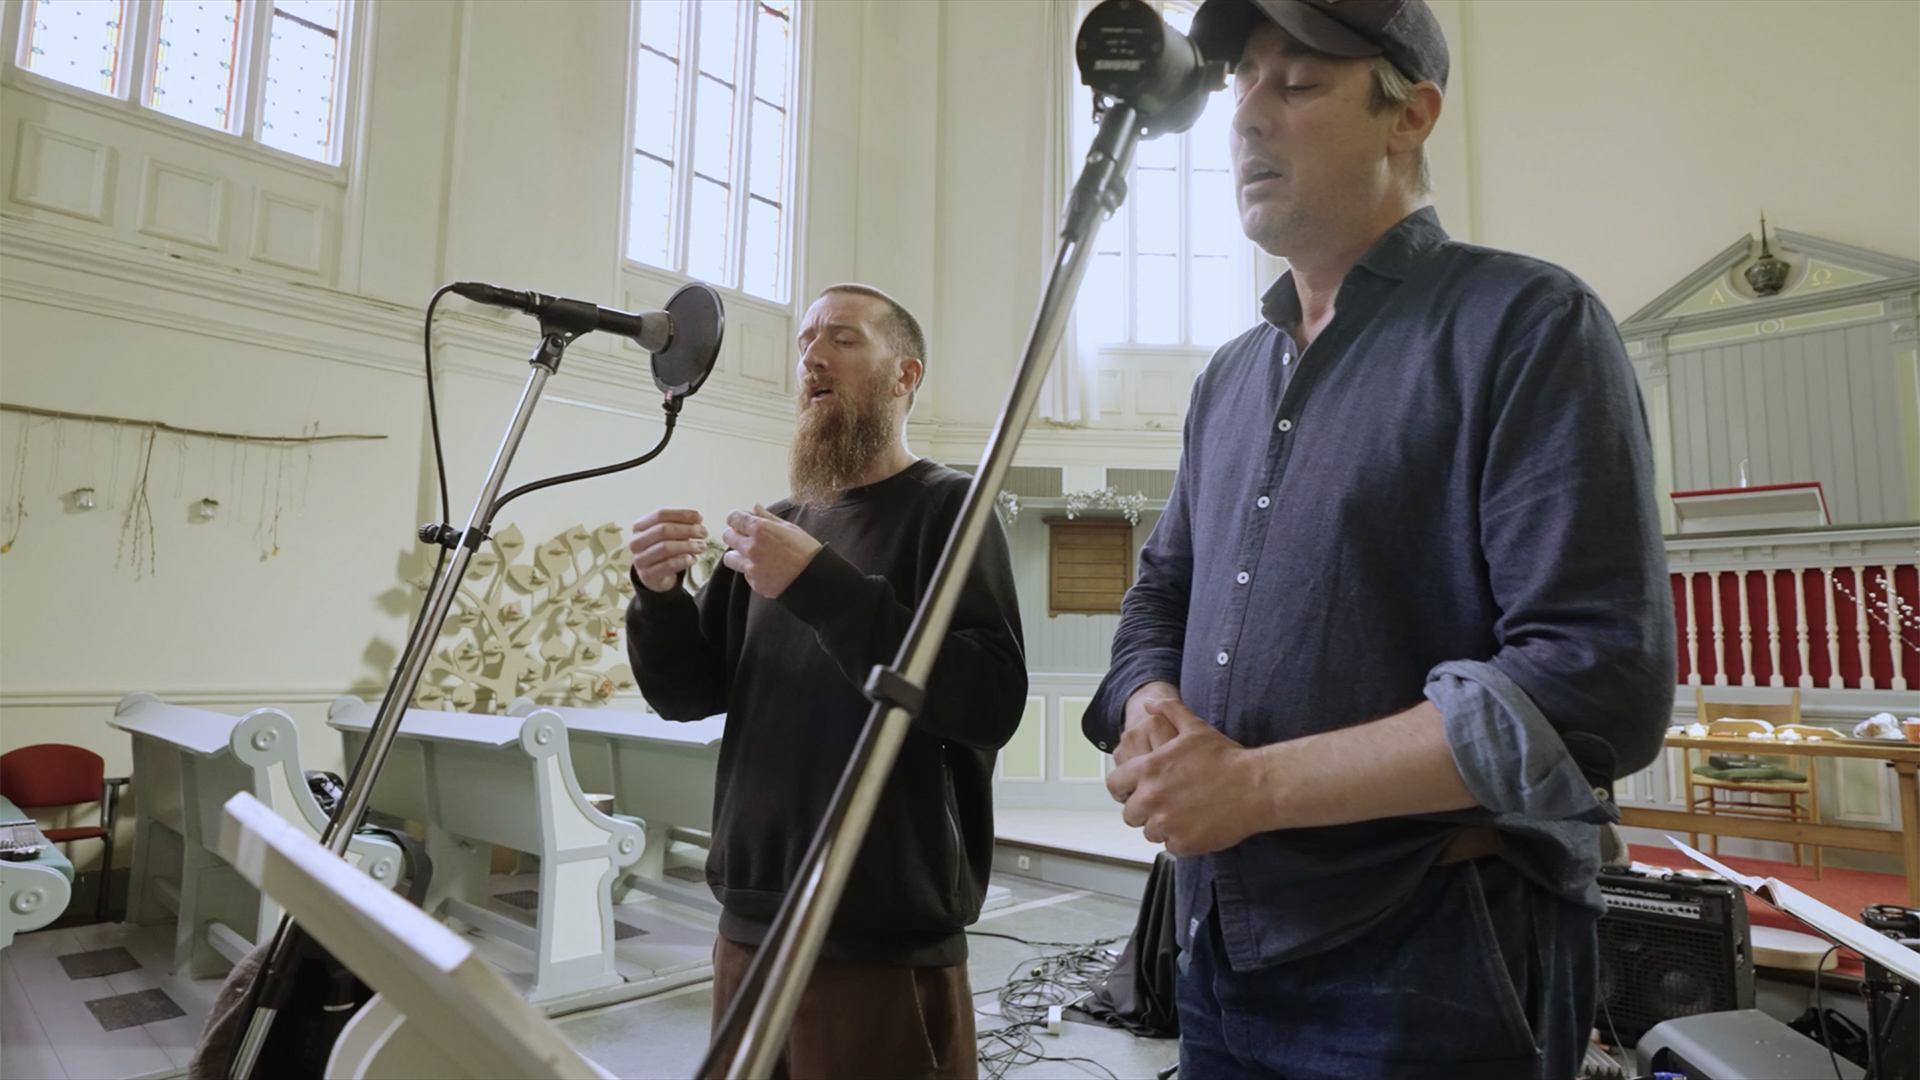 Video portrait: Gebroeders Dieleman van Eeckhout discuss faith, grief, and musical playgrounds during recordings